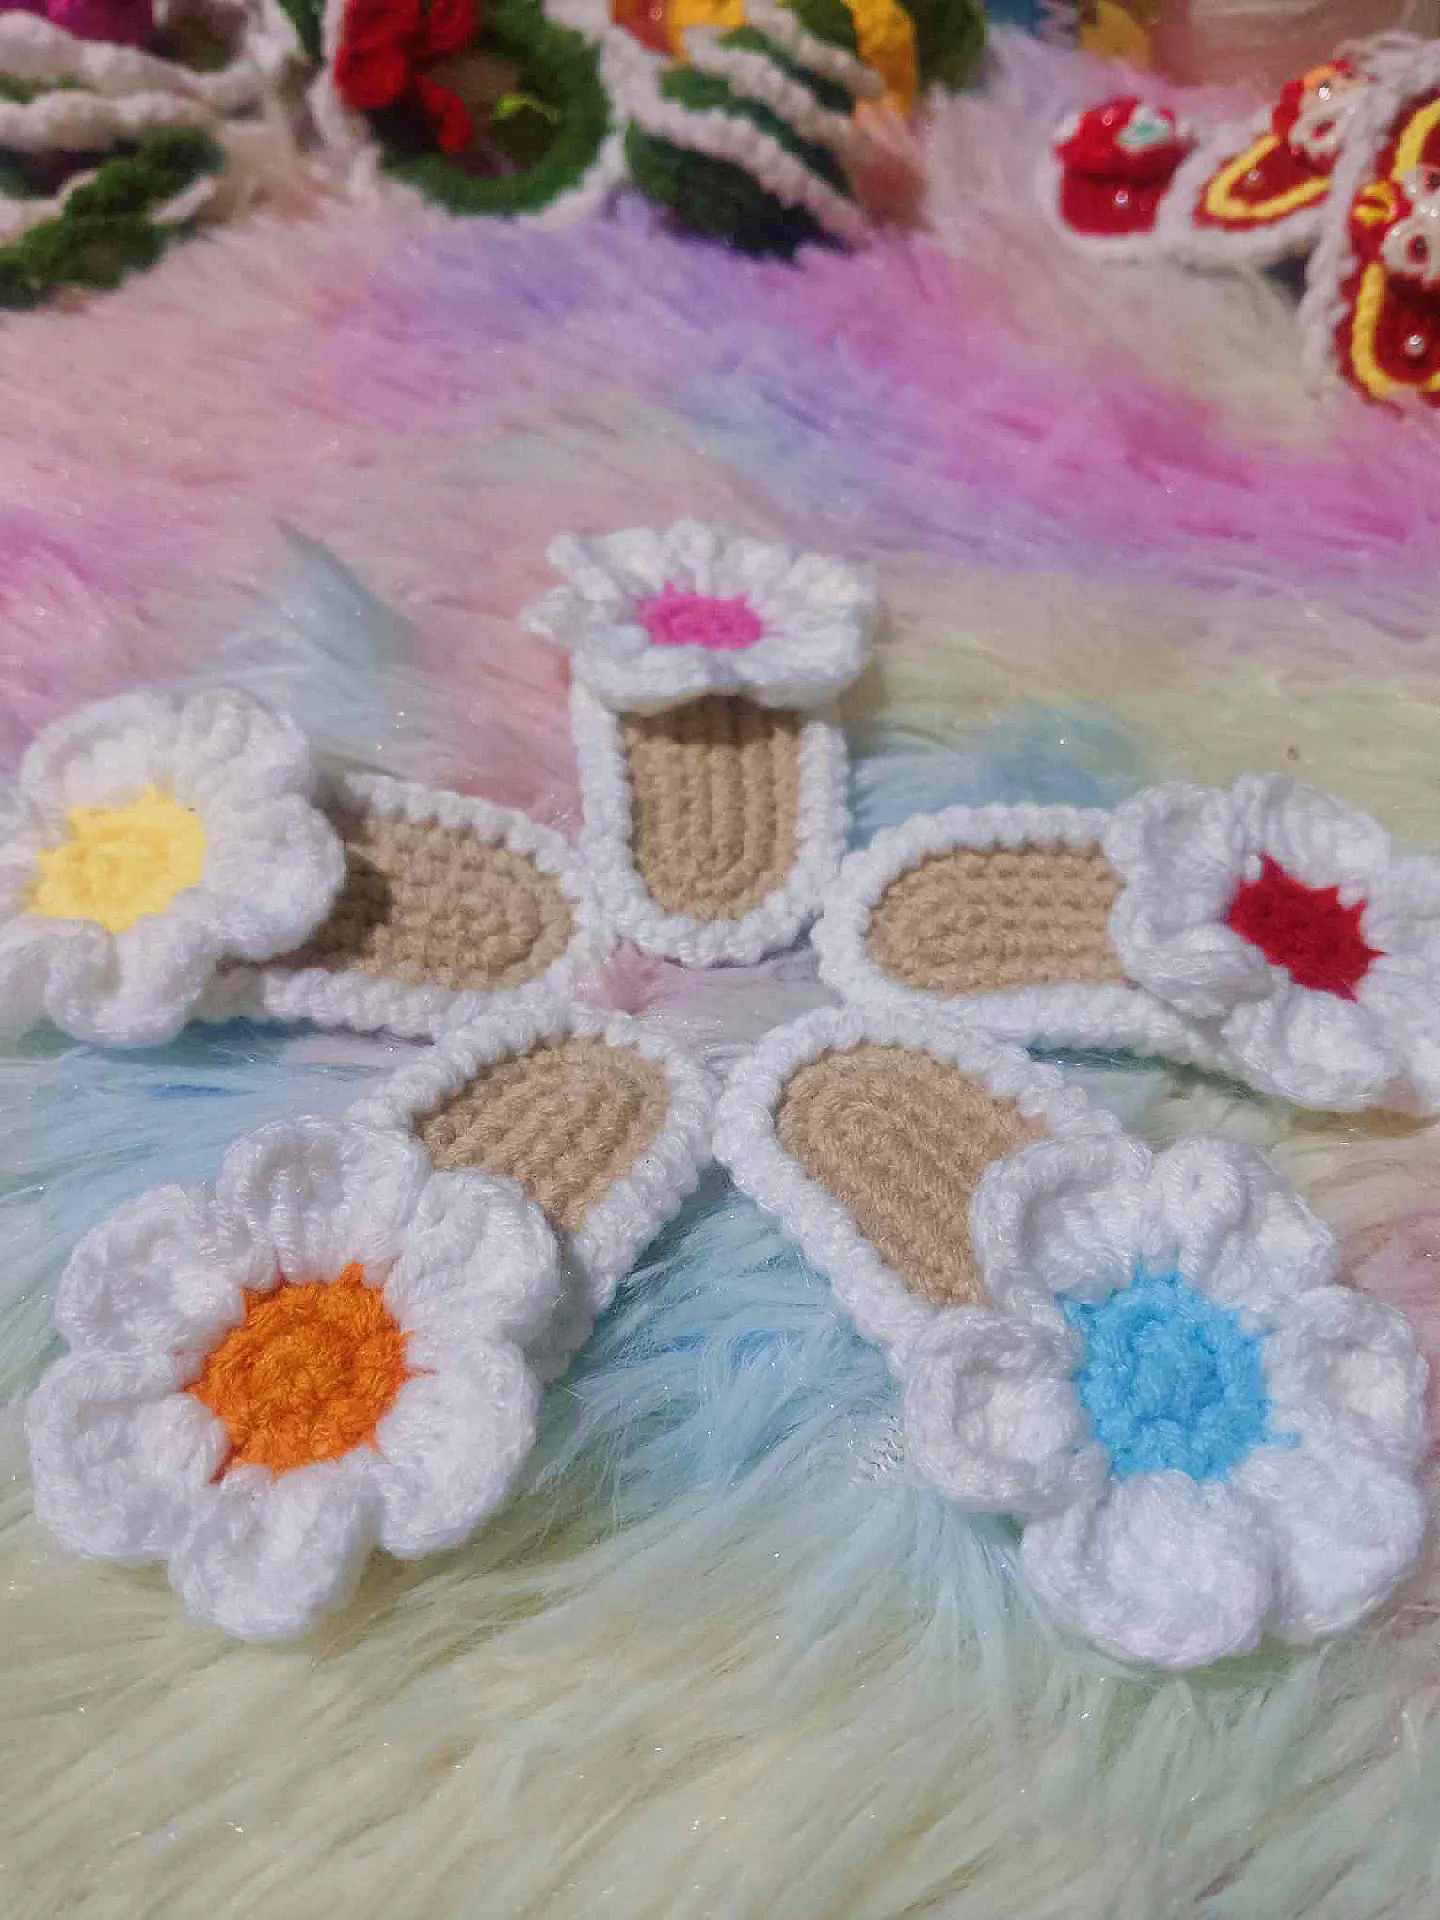 some updates on what I'm working on!! Ive been rly busy!! #crochet #cr